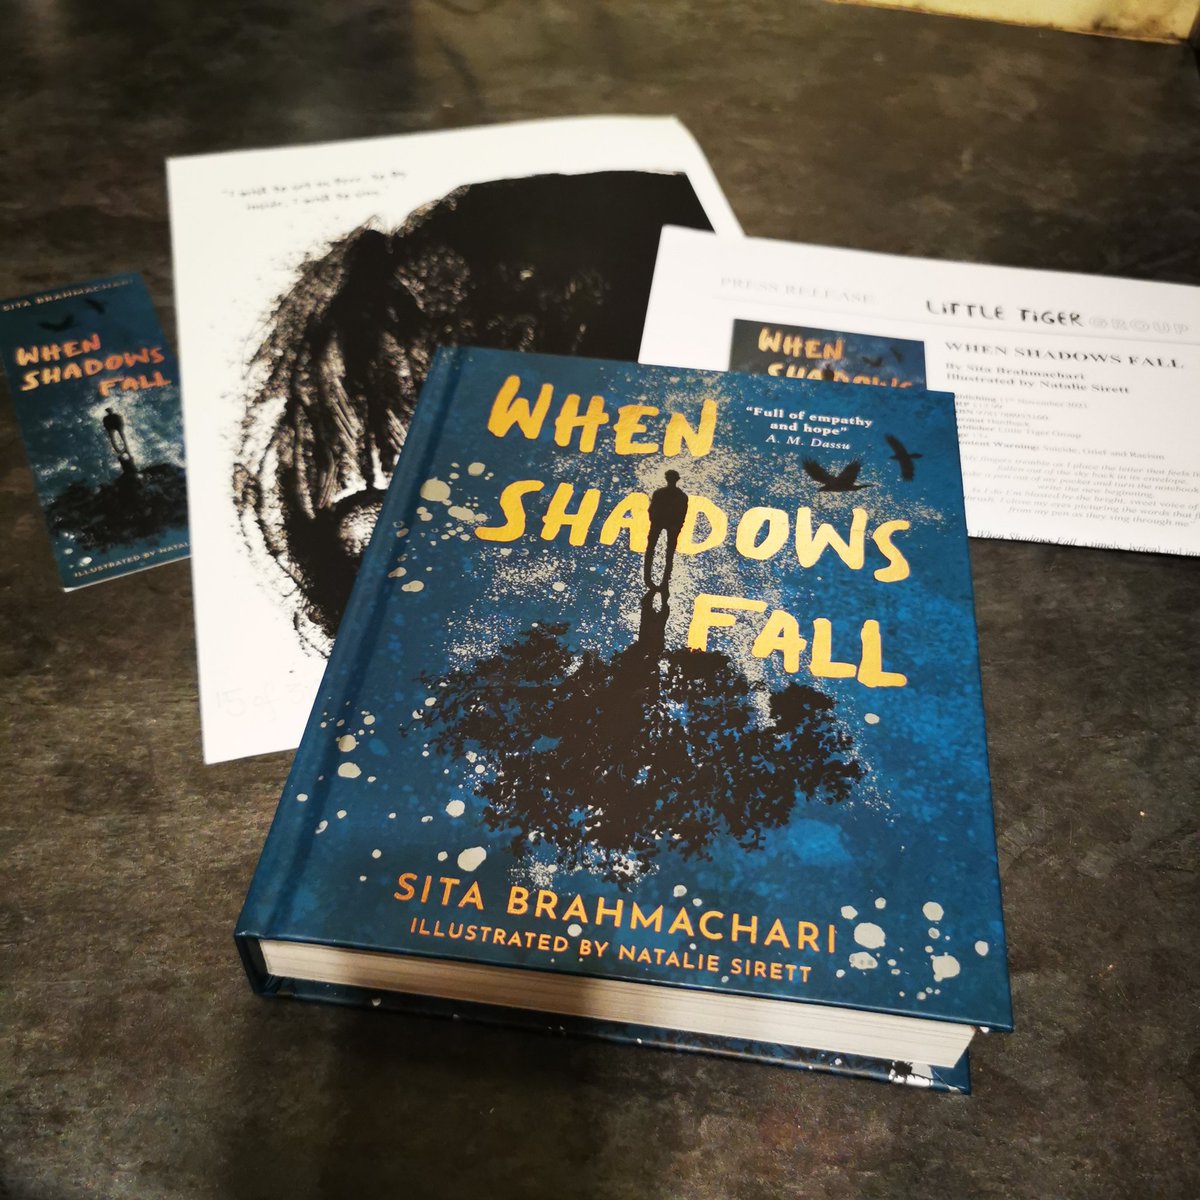 I'm moved just listening to @SitaBrahmachari talk with passion about #whenshadowsfall, get ready for this fantastic book @LittleTigerUK @StripesBooks @ninadouglas now listening to her read from the book. I'll be featuring this on the blog/insta. Out Nov 11th